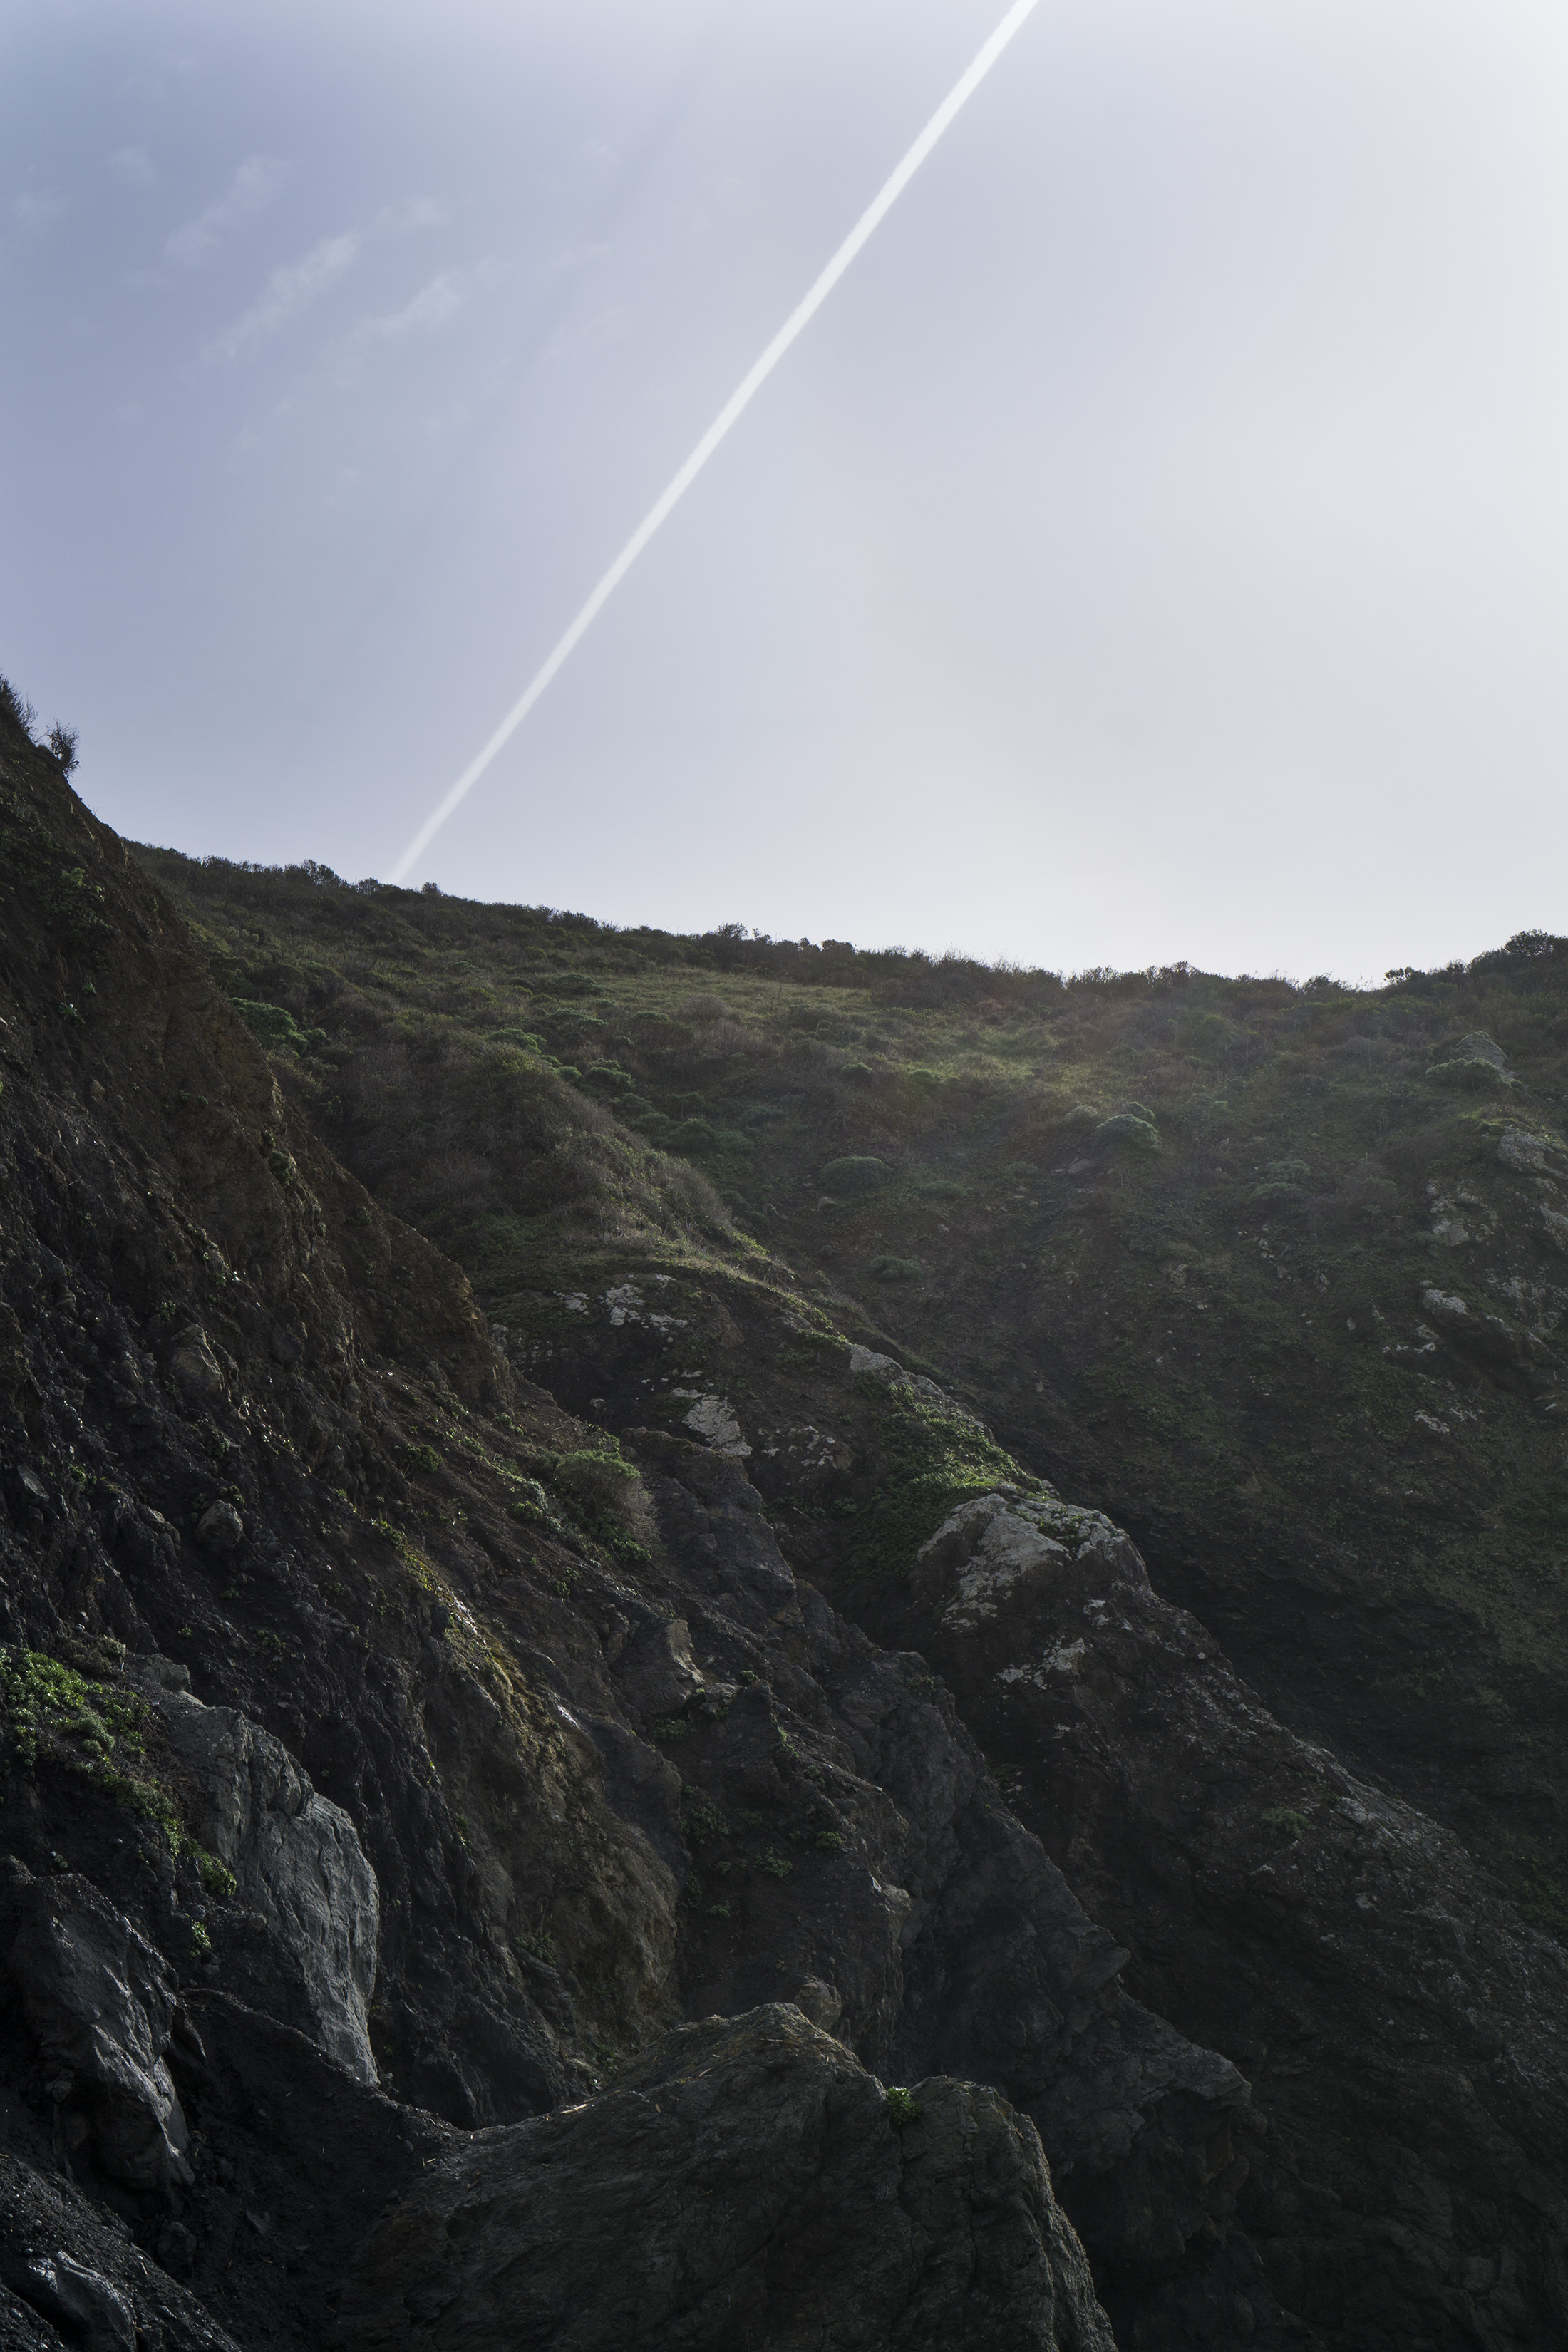 Contrail in the sky behind the cliff at Pirates Cove, Marin Headlands, Golden Gate National Recreation Area / Darker than Green